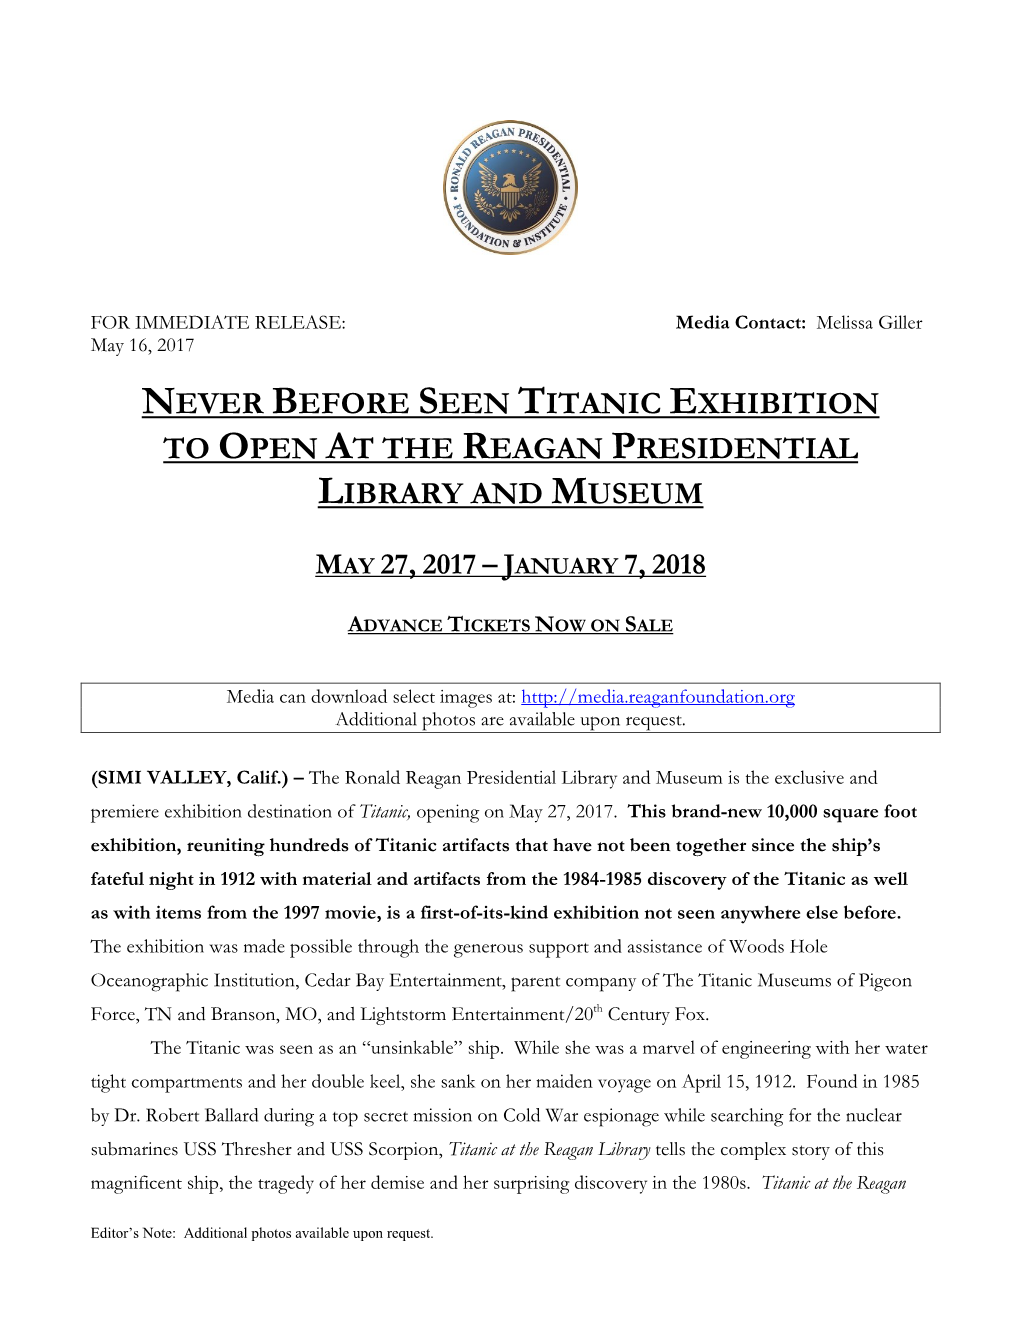 Never Before Seen Titanic Exhibition to Open at the Reagan Presidential Library and Museum